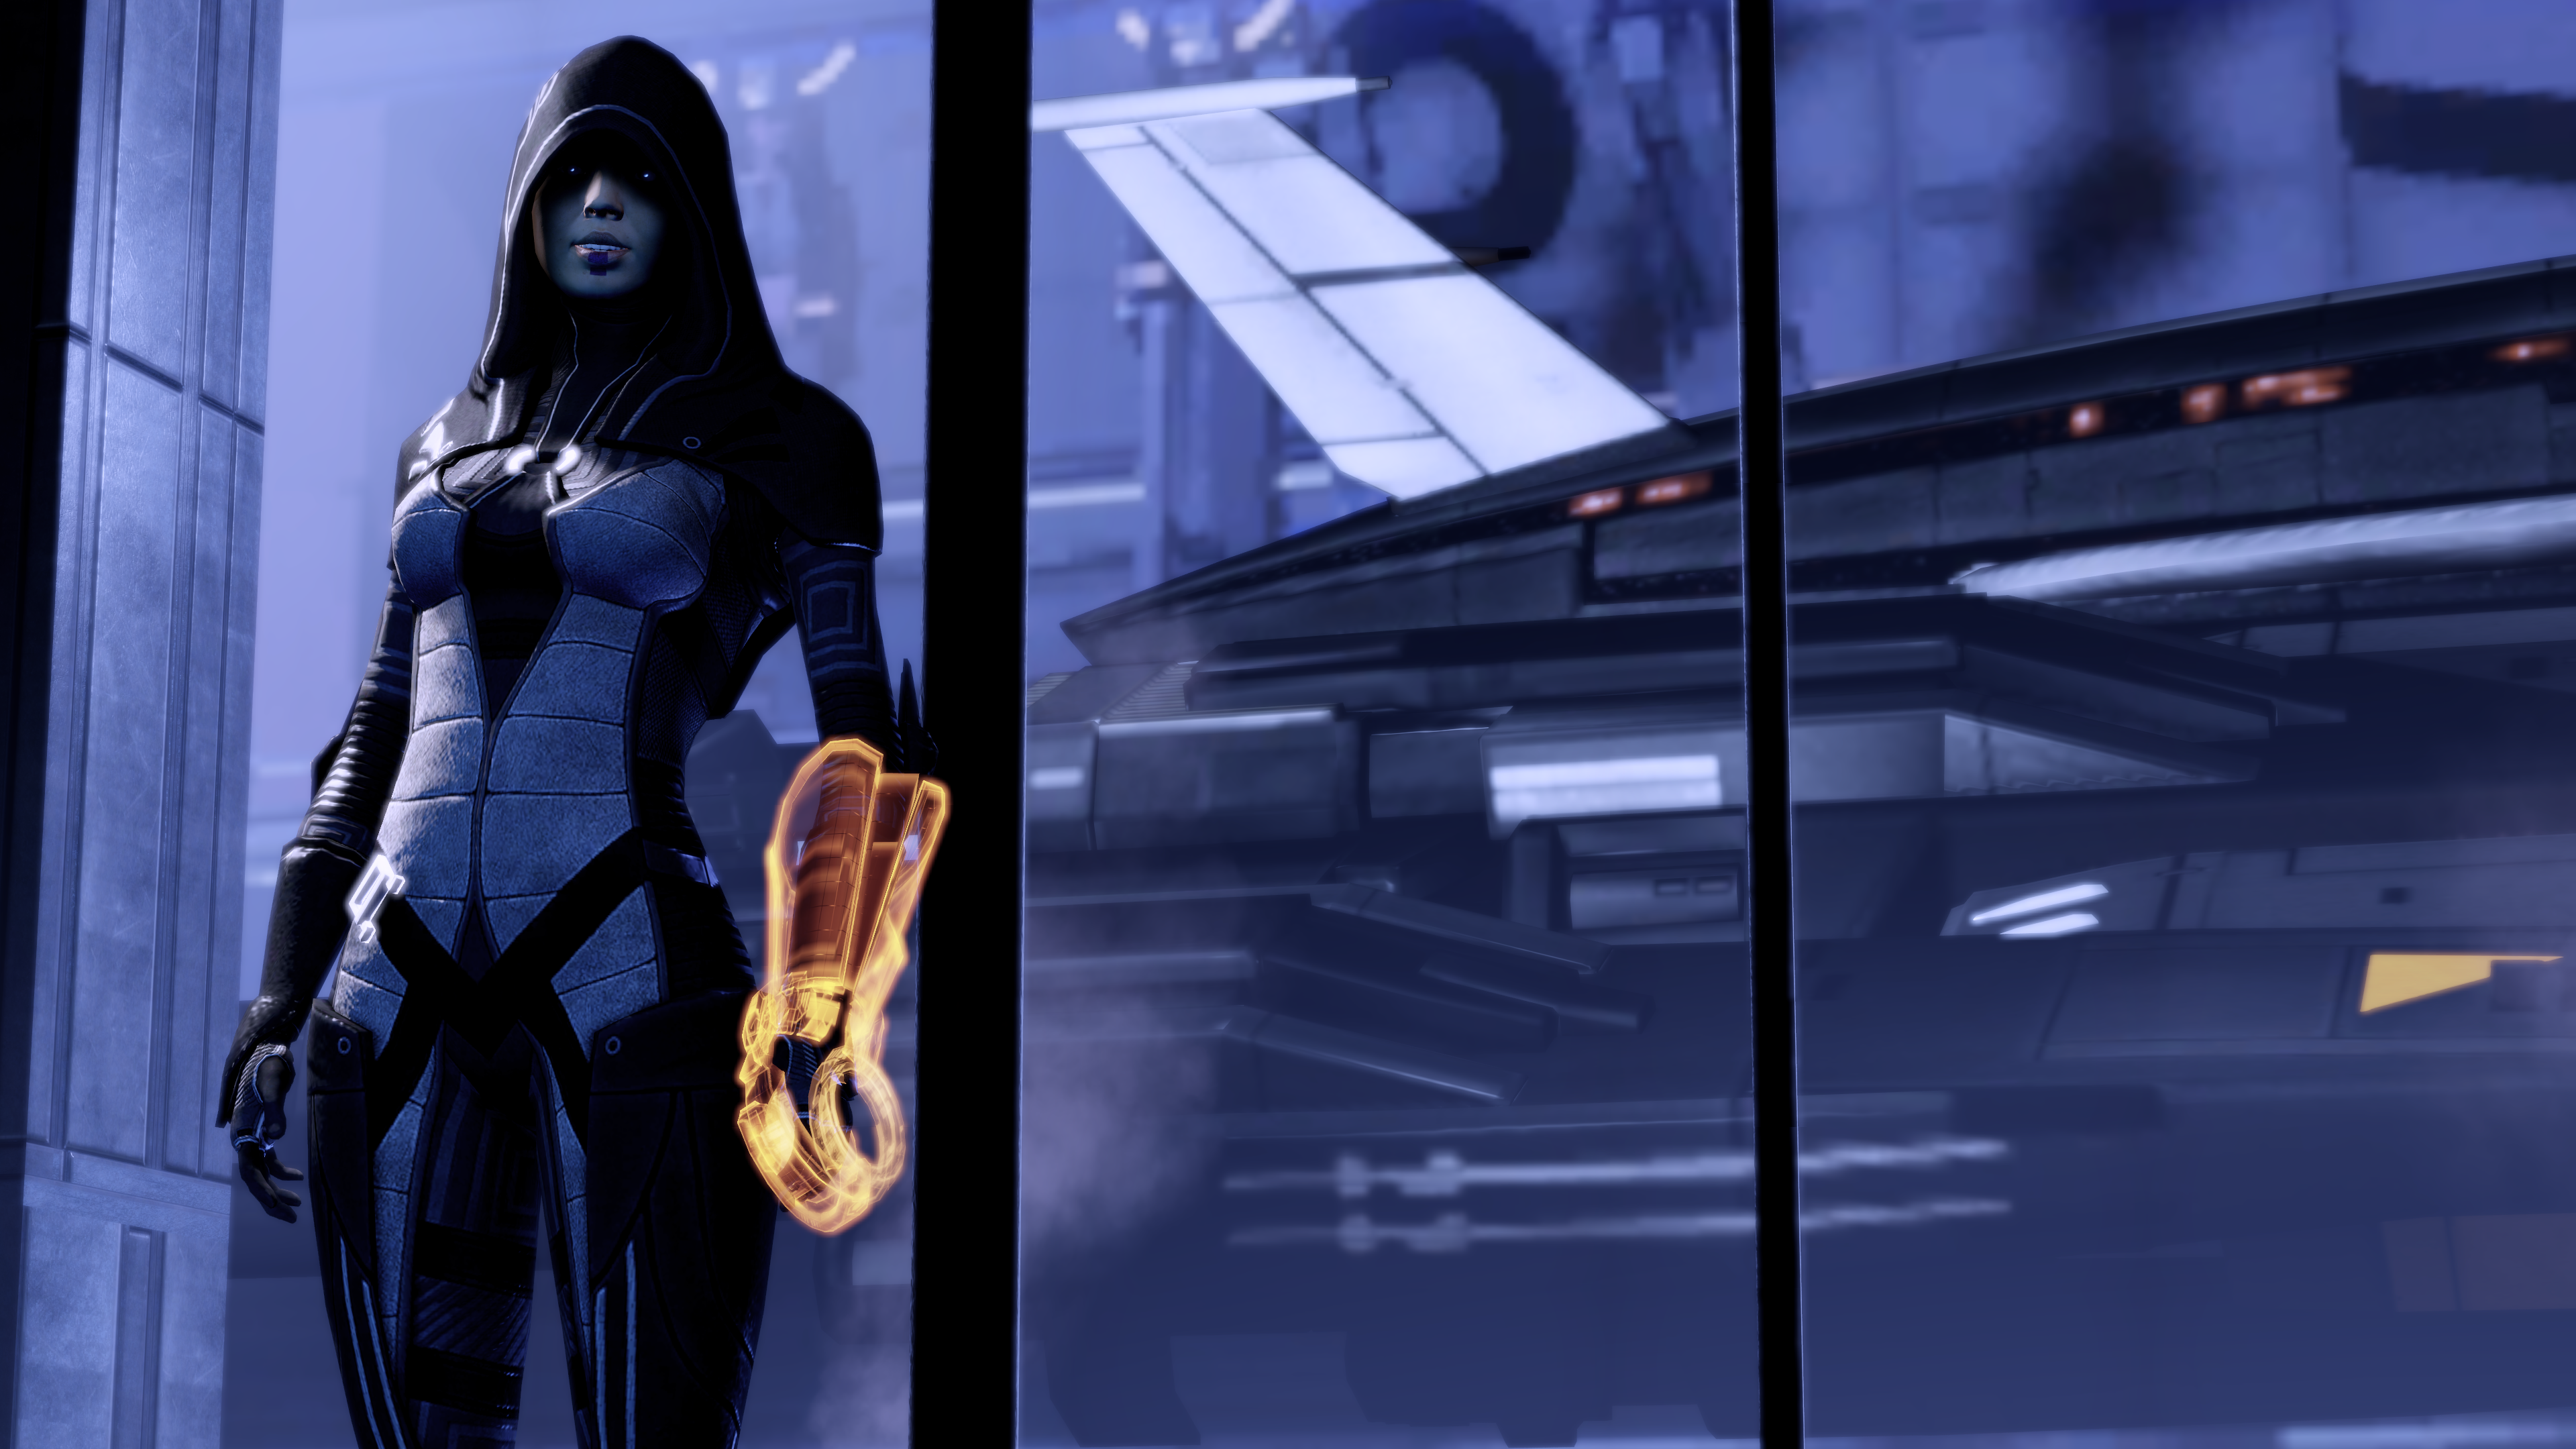 General 3840x2160 Mass Effect science fiction Kasumi Goto Mass Effect 2 Normandy SR-2 video games PC gaming science fiction women